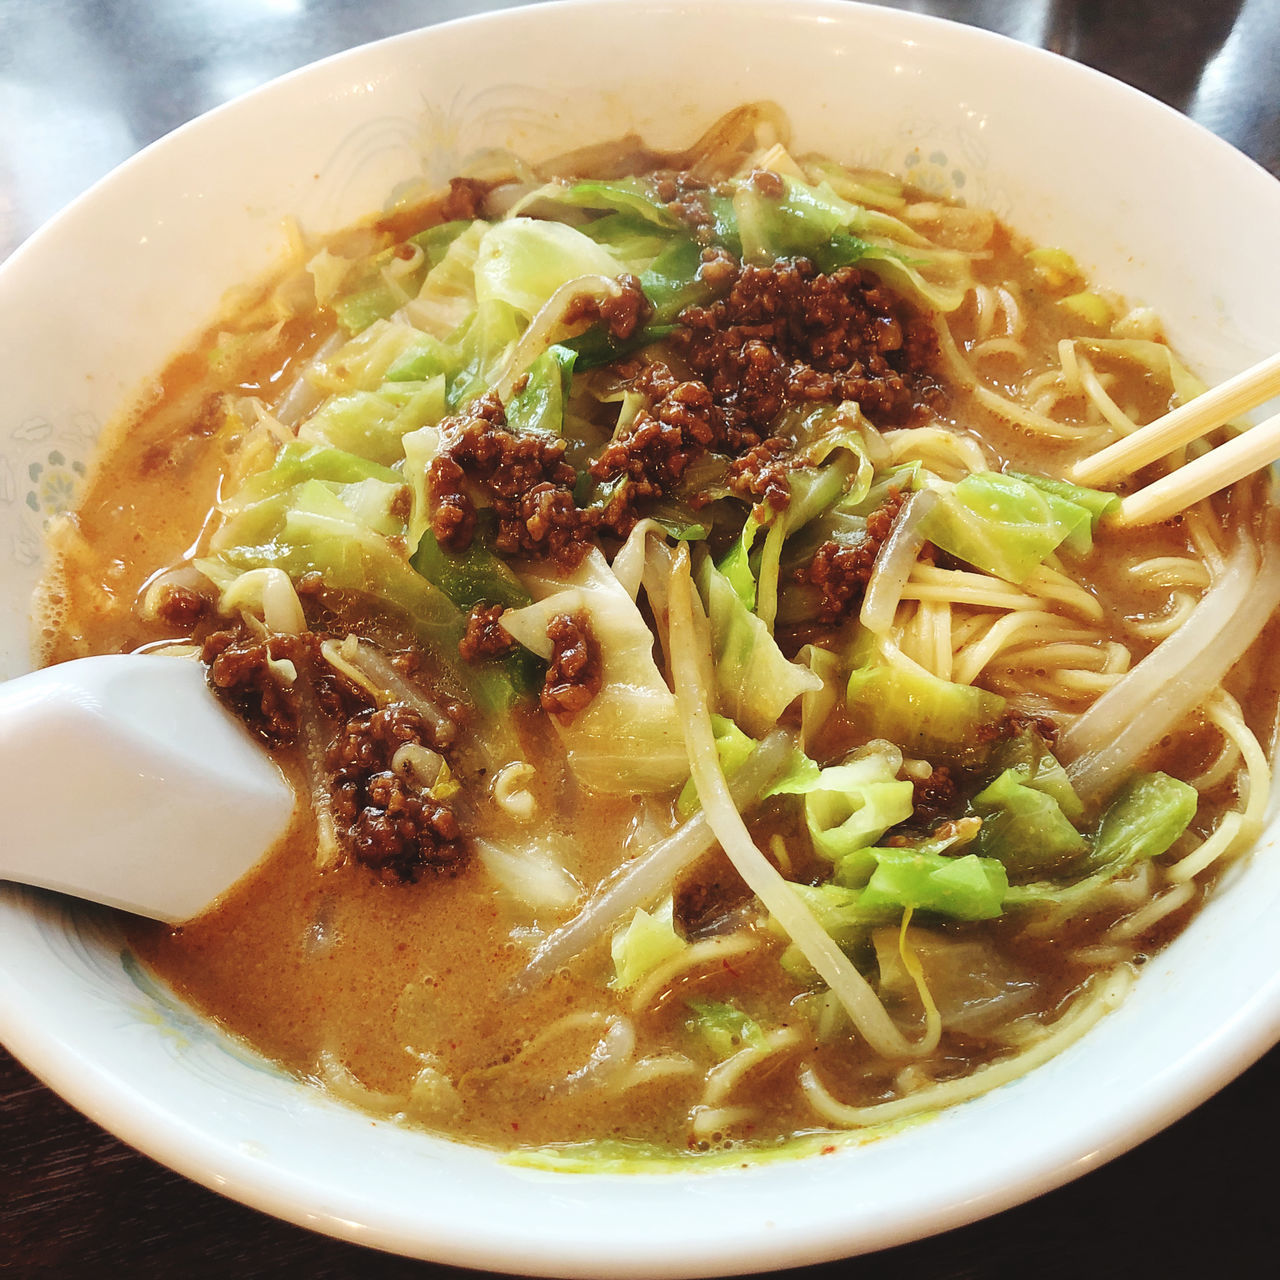 noodle soup, food and drink, food, pasta, healthy eating, bún bò huế, noodle, italian food, bowl, wellbeing, asian food, soup, dish, cuisine, freshness, indoors, chinese food, beef noodle soup, no people, meal, table, close-up, vegetable, high angle view, kalguksu, meat, mi rebus, serving size, chow mein, still life, kuy teav, ramen noodles